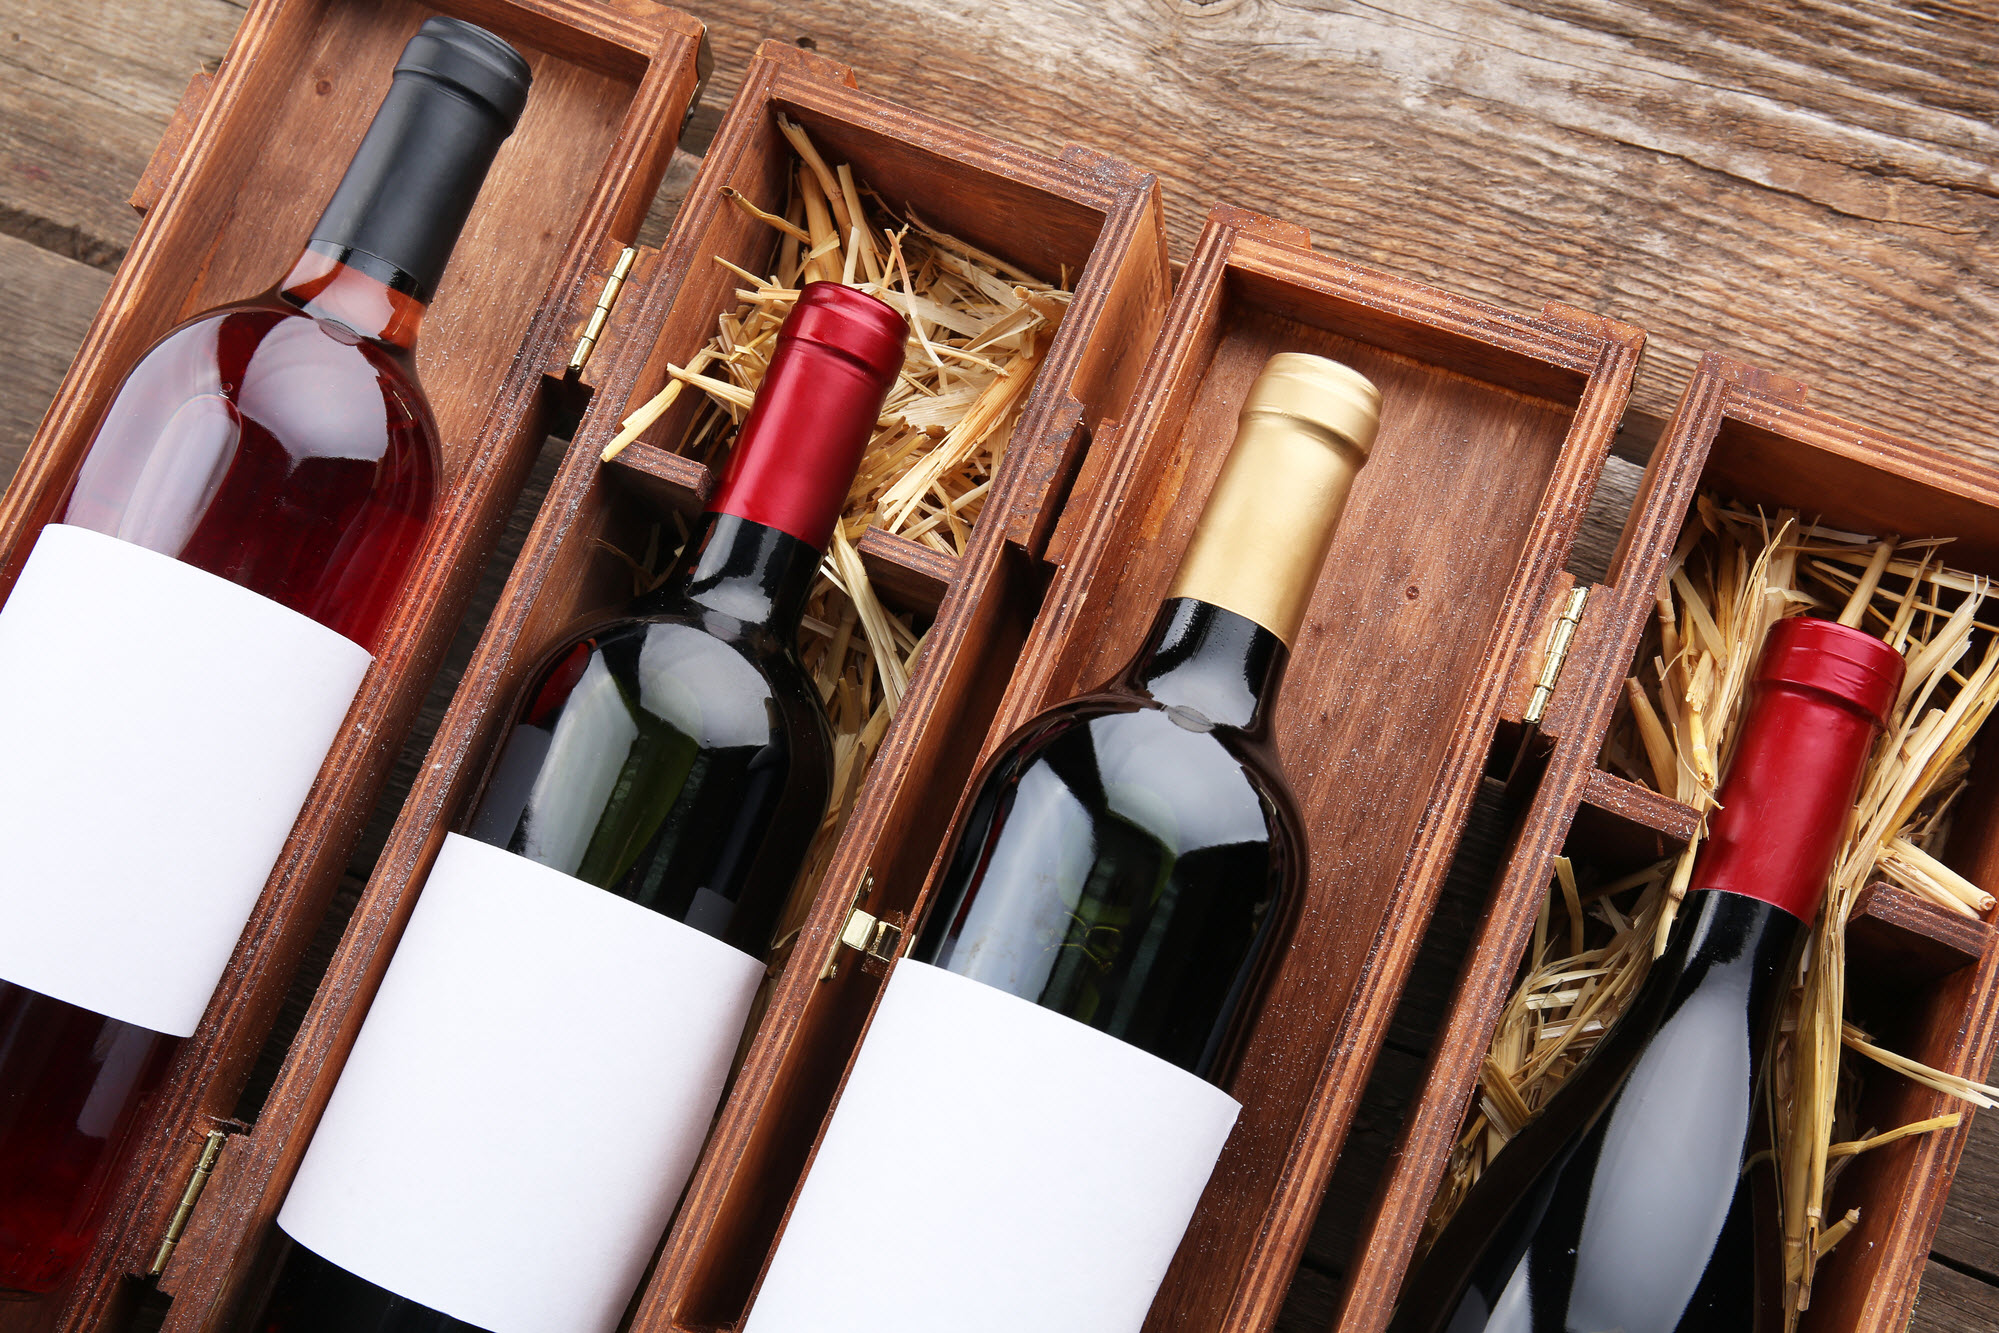 Save 50% On Wine Club Delivery with Code EWINE50